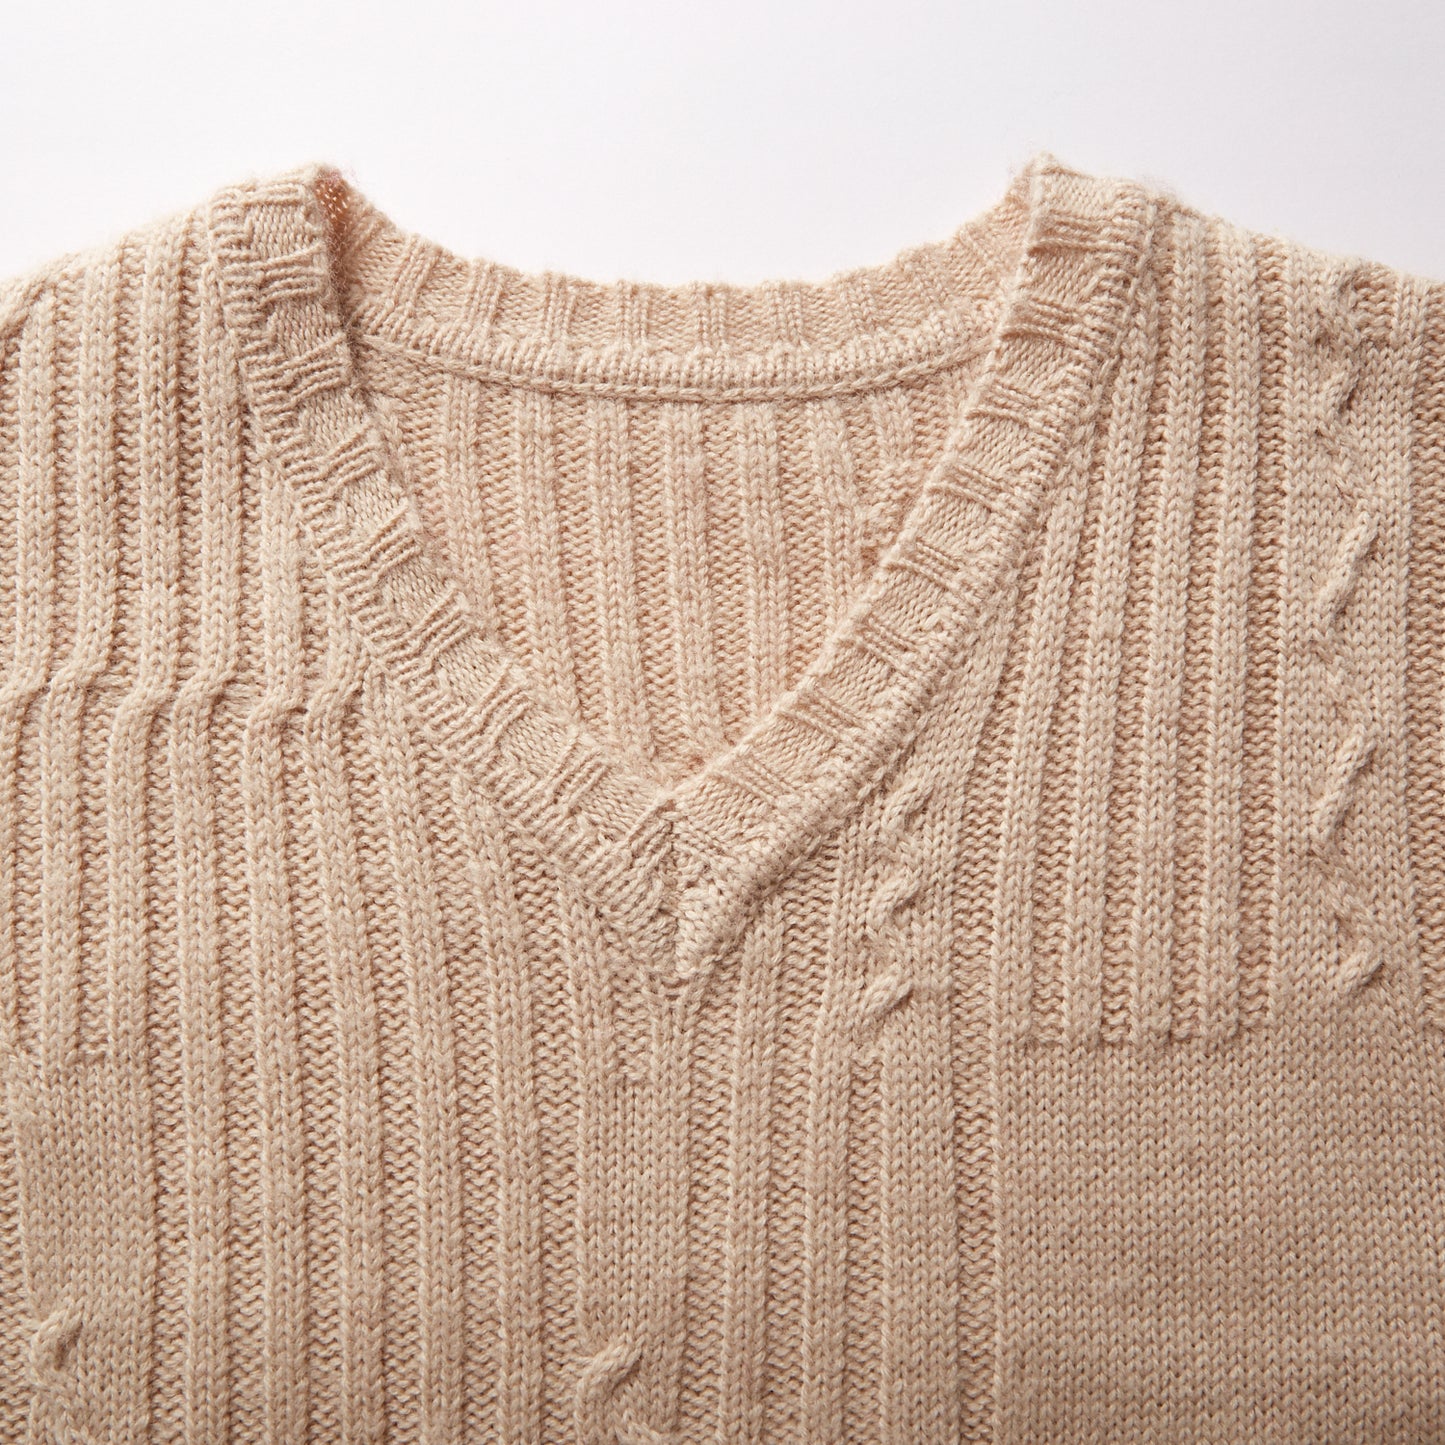 Fully Fashioning Finn Cable Knit Sweater Dress